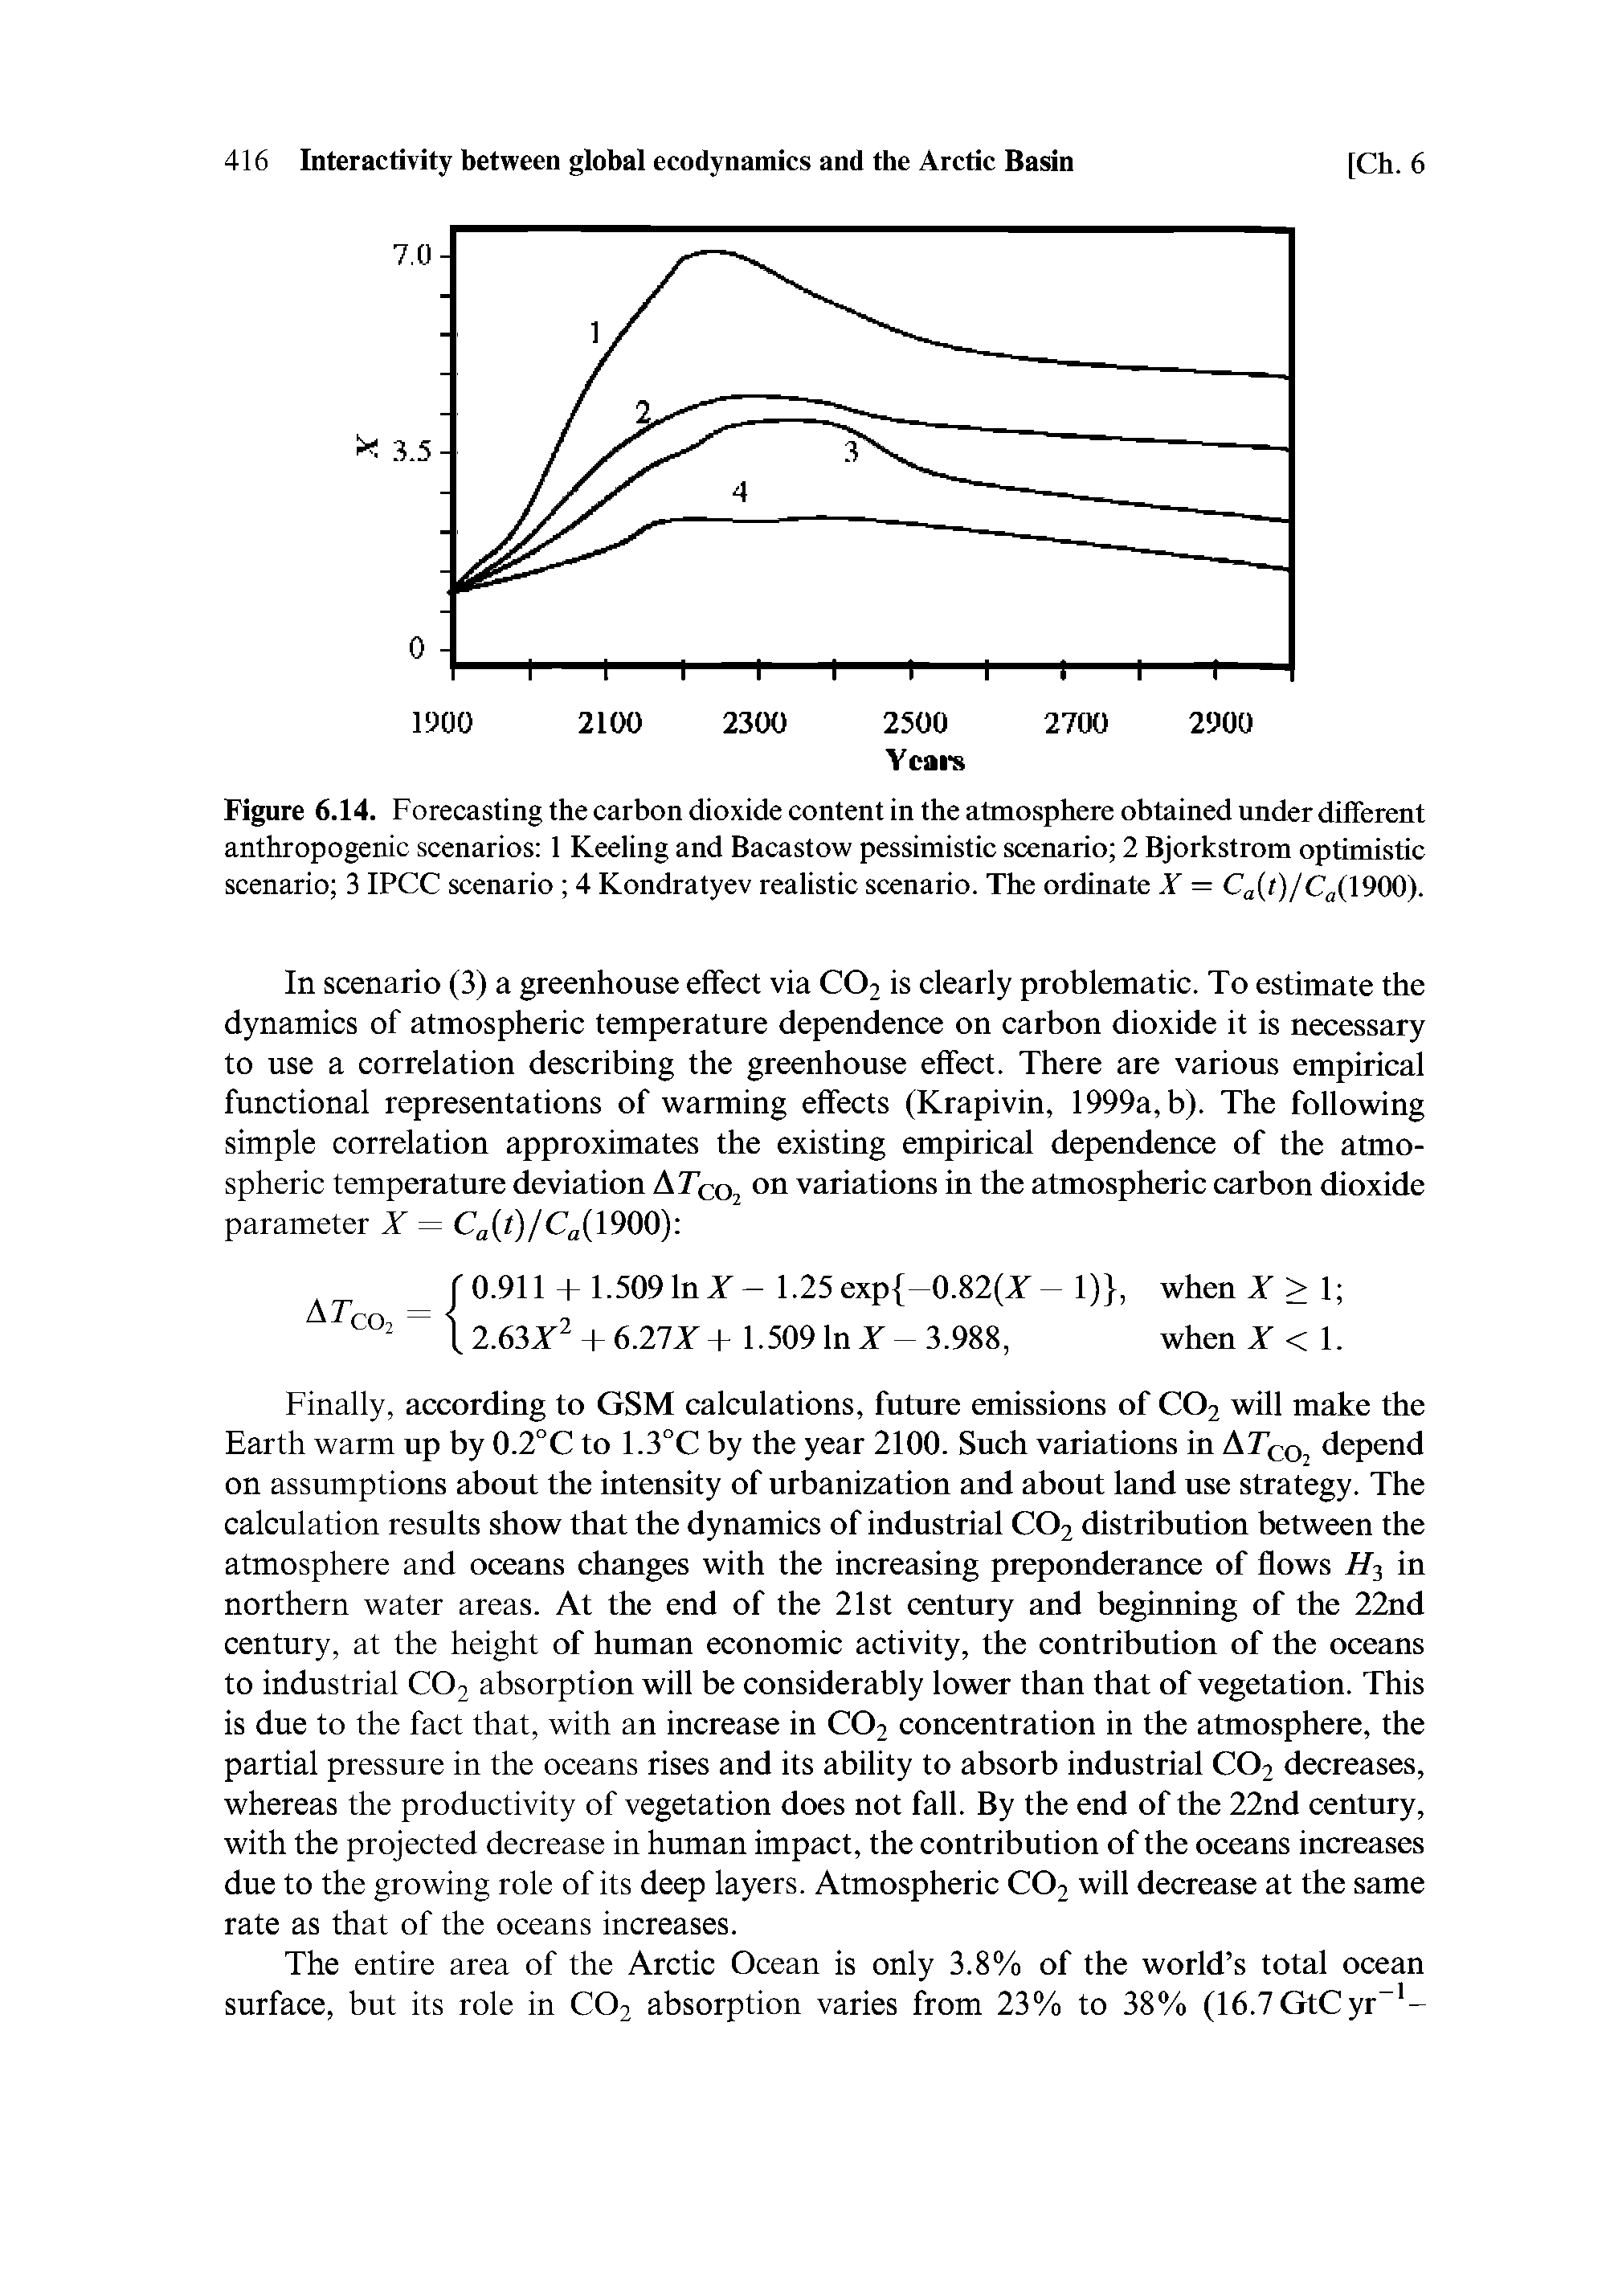 Figure 6.14. Forecasting the carbon dioxide content in the atmosphere obtained under different anthropogenic scenarios 1 Keeling and Bacastow pessimistic scenario 2 Bjorkstrom optimistic scenario 3 IPCC scenario 4 Kondratyev realistic scenario. The ordinate A = Ca(t)/Ca(1900).